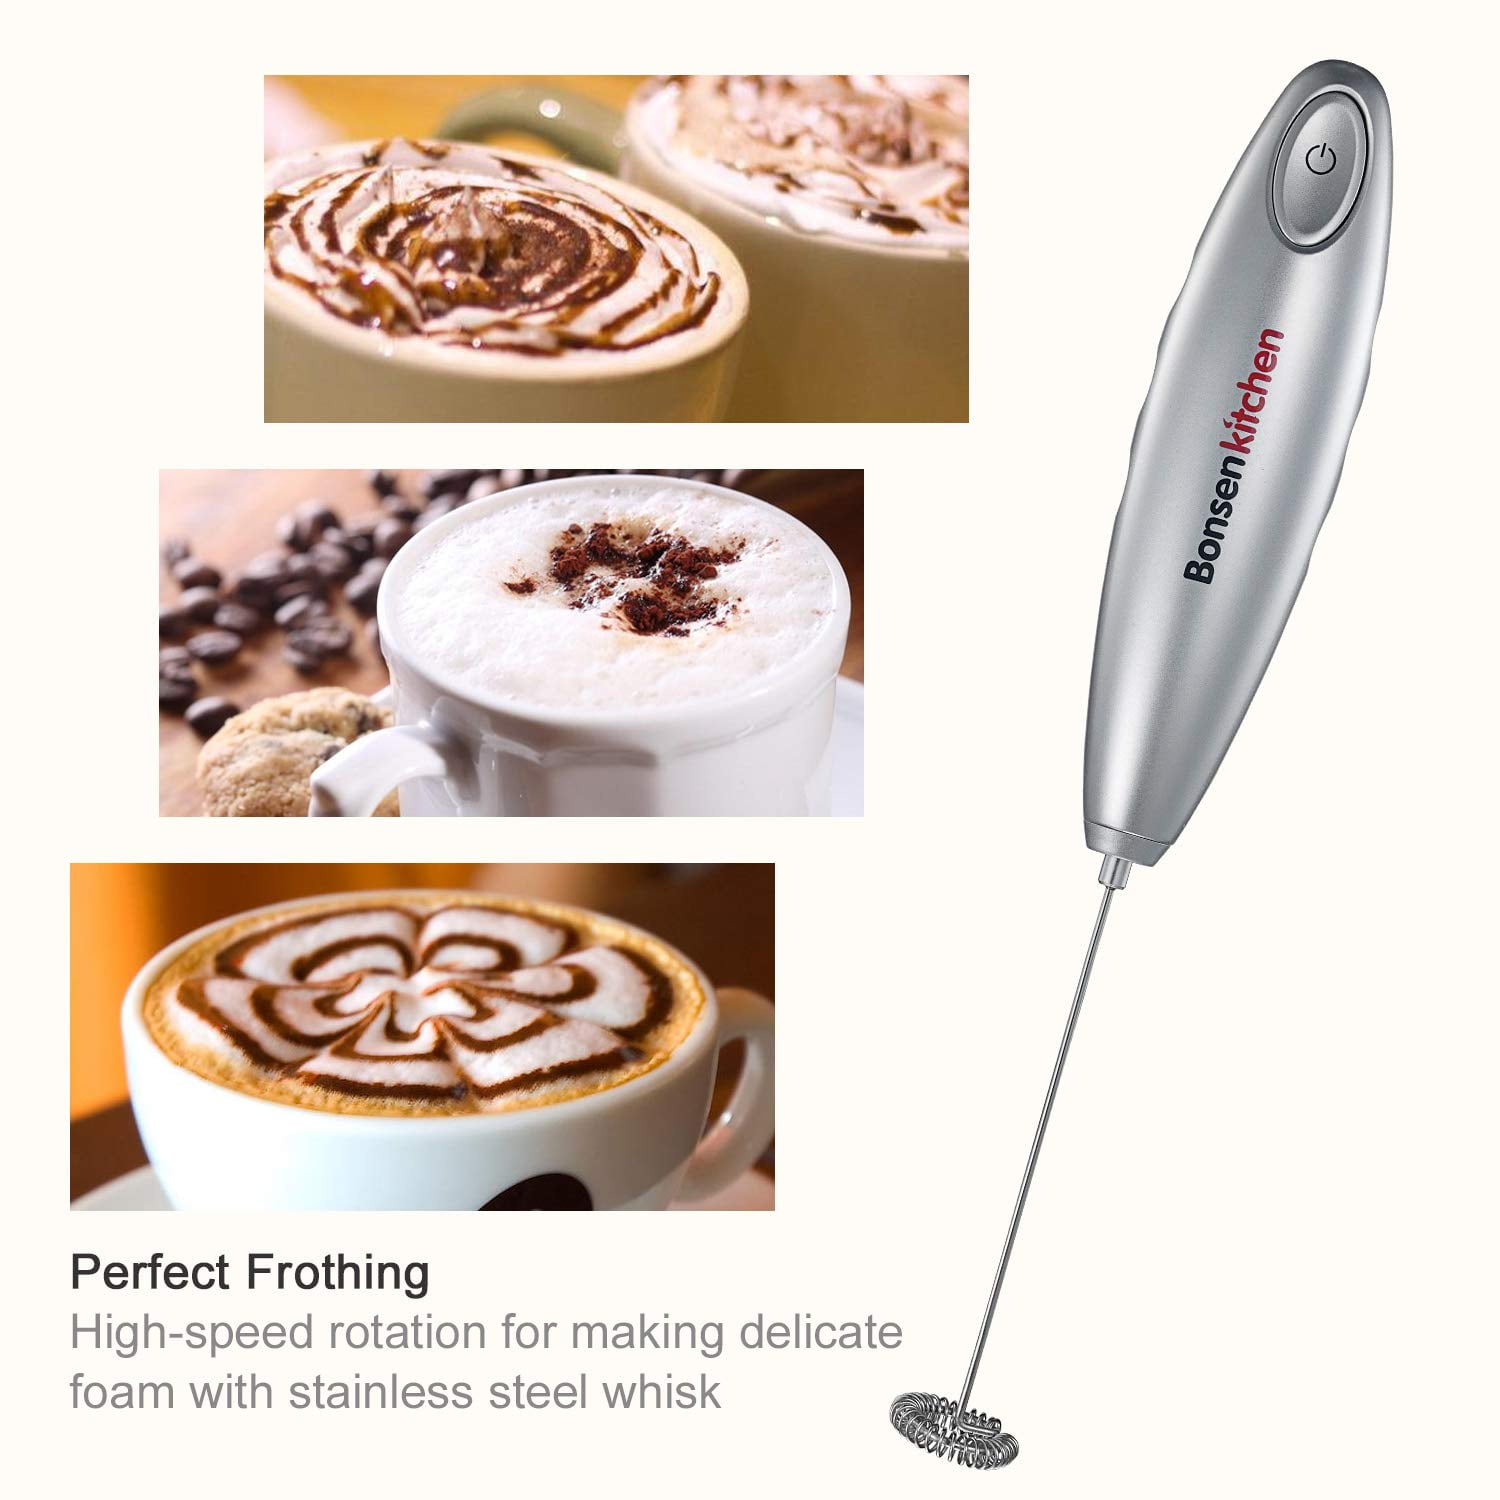 Bonsenkitchen Handheld Milk Frother Electric Hand Foamer Blender for Drink Mixer Perfect for Bulletproof Coffee Matcha Hot Chocolate Mini Battery